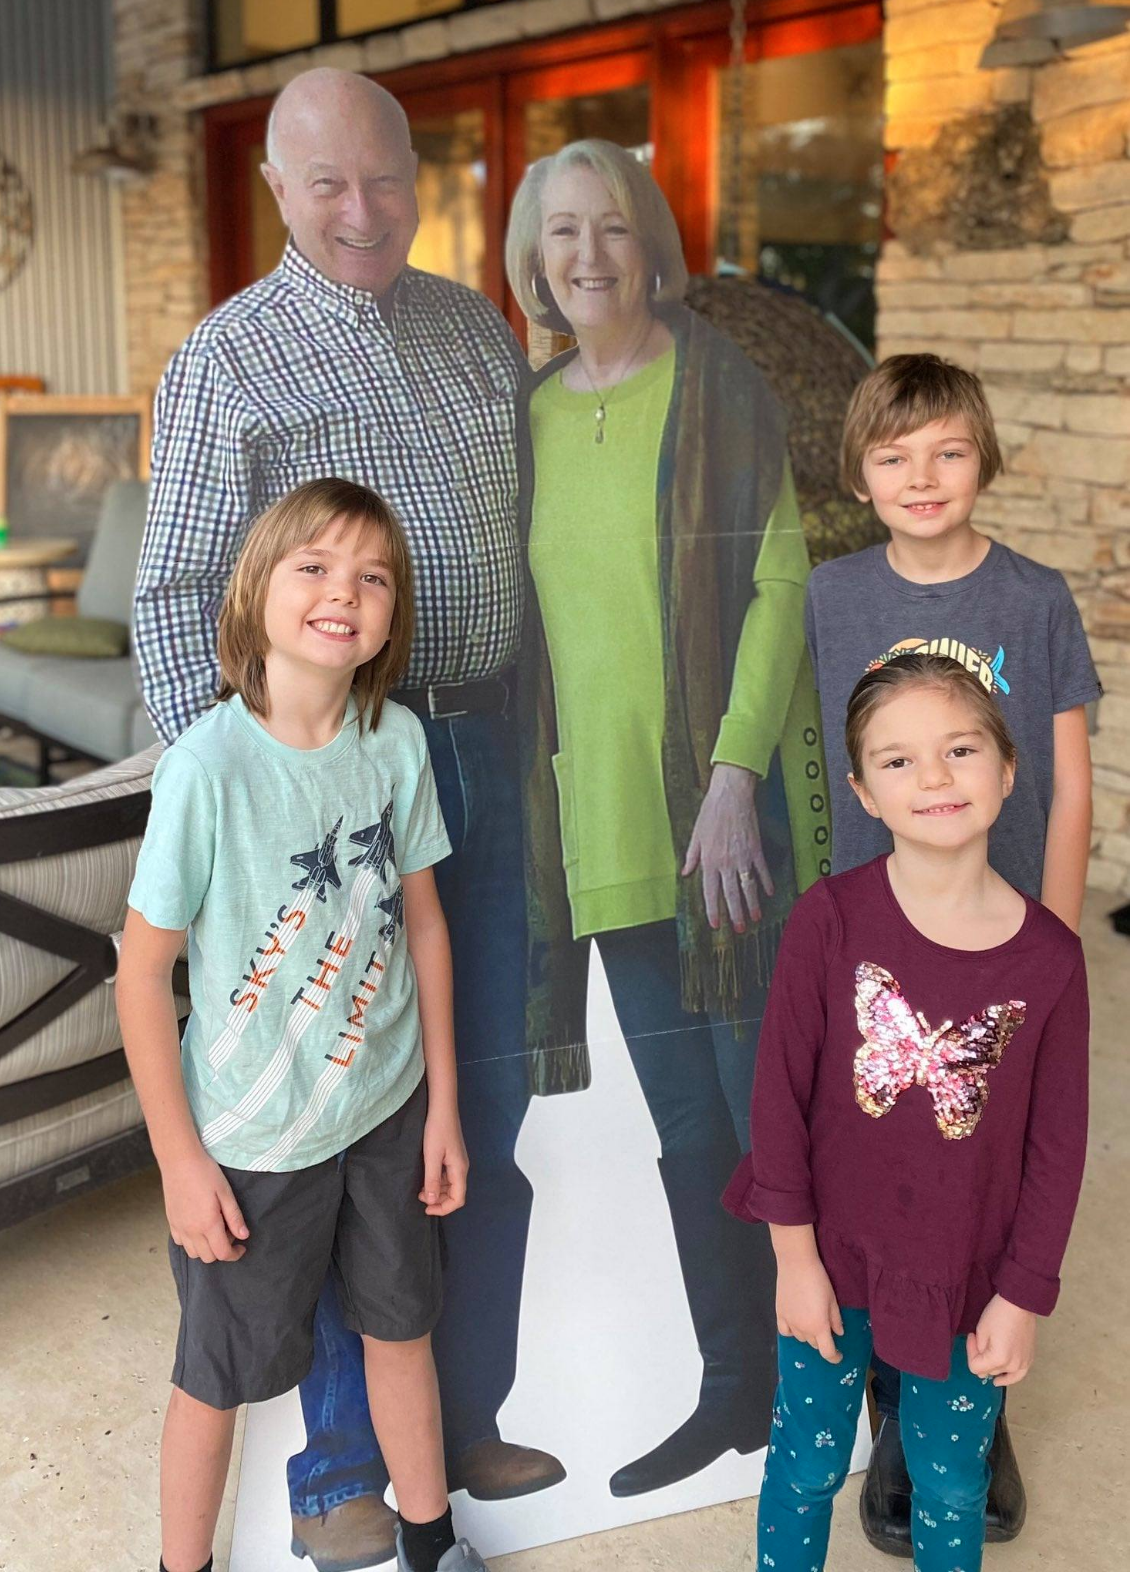 It’s 2020 so These Grandparents Sent Their Own Life-sized Cardboard Cutouts to Celebrate Thanksgiving